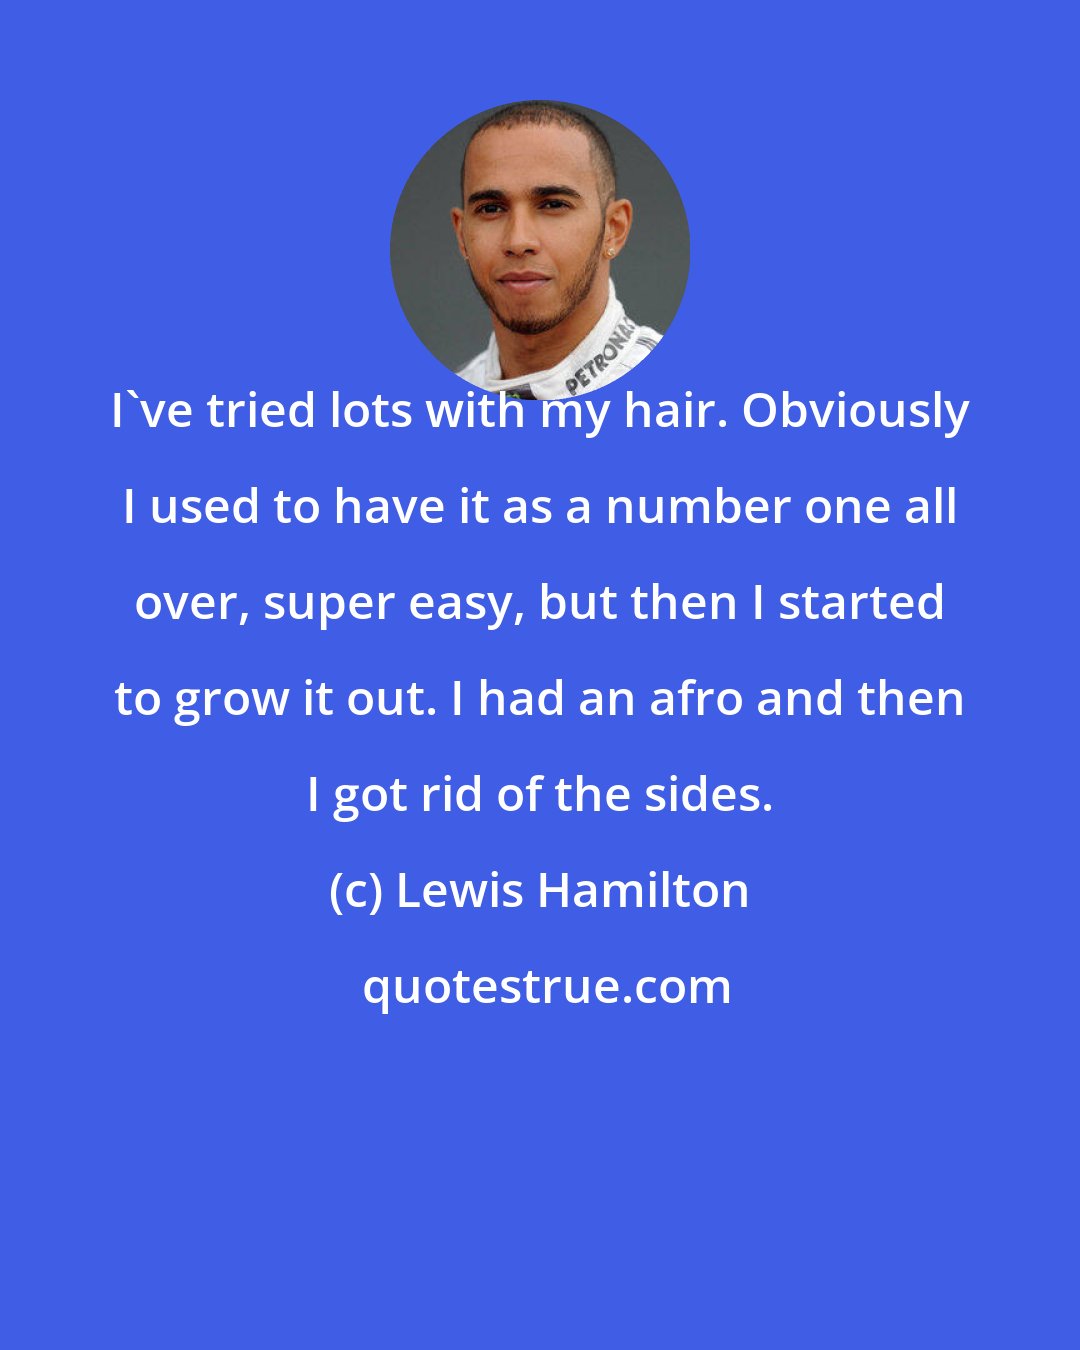 Lewis Hamilton: I've tried lots with my hair. Obviously I used to have it as a number one all over, super easy, but then I started to grow it out. I had an afro and then I got rid of the sides.